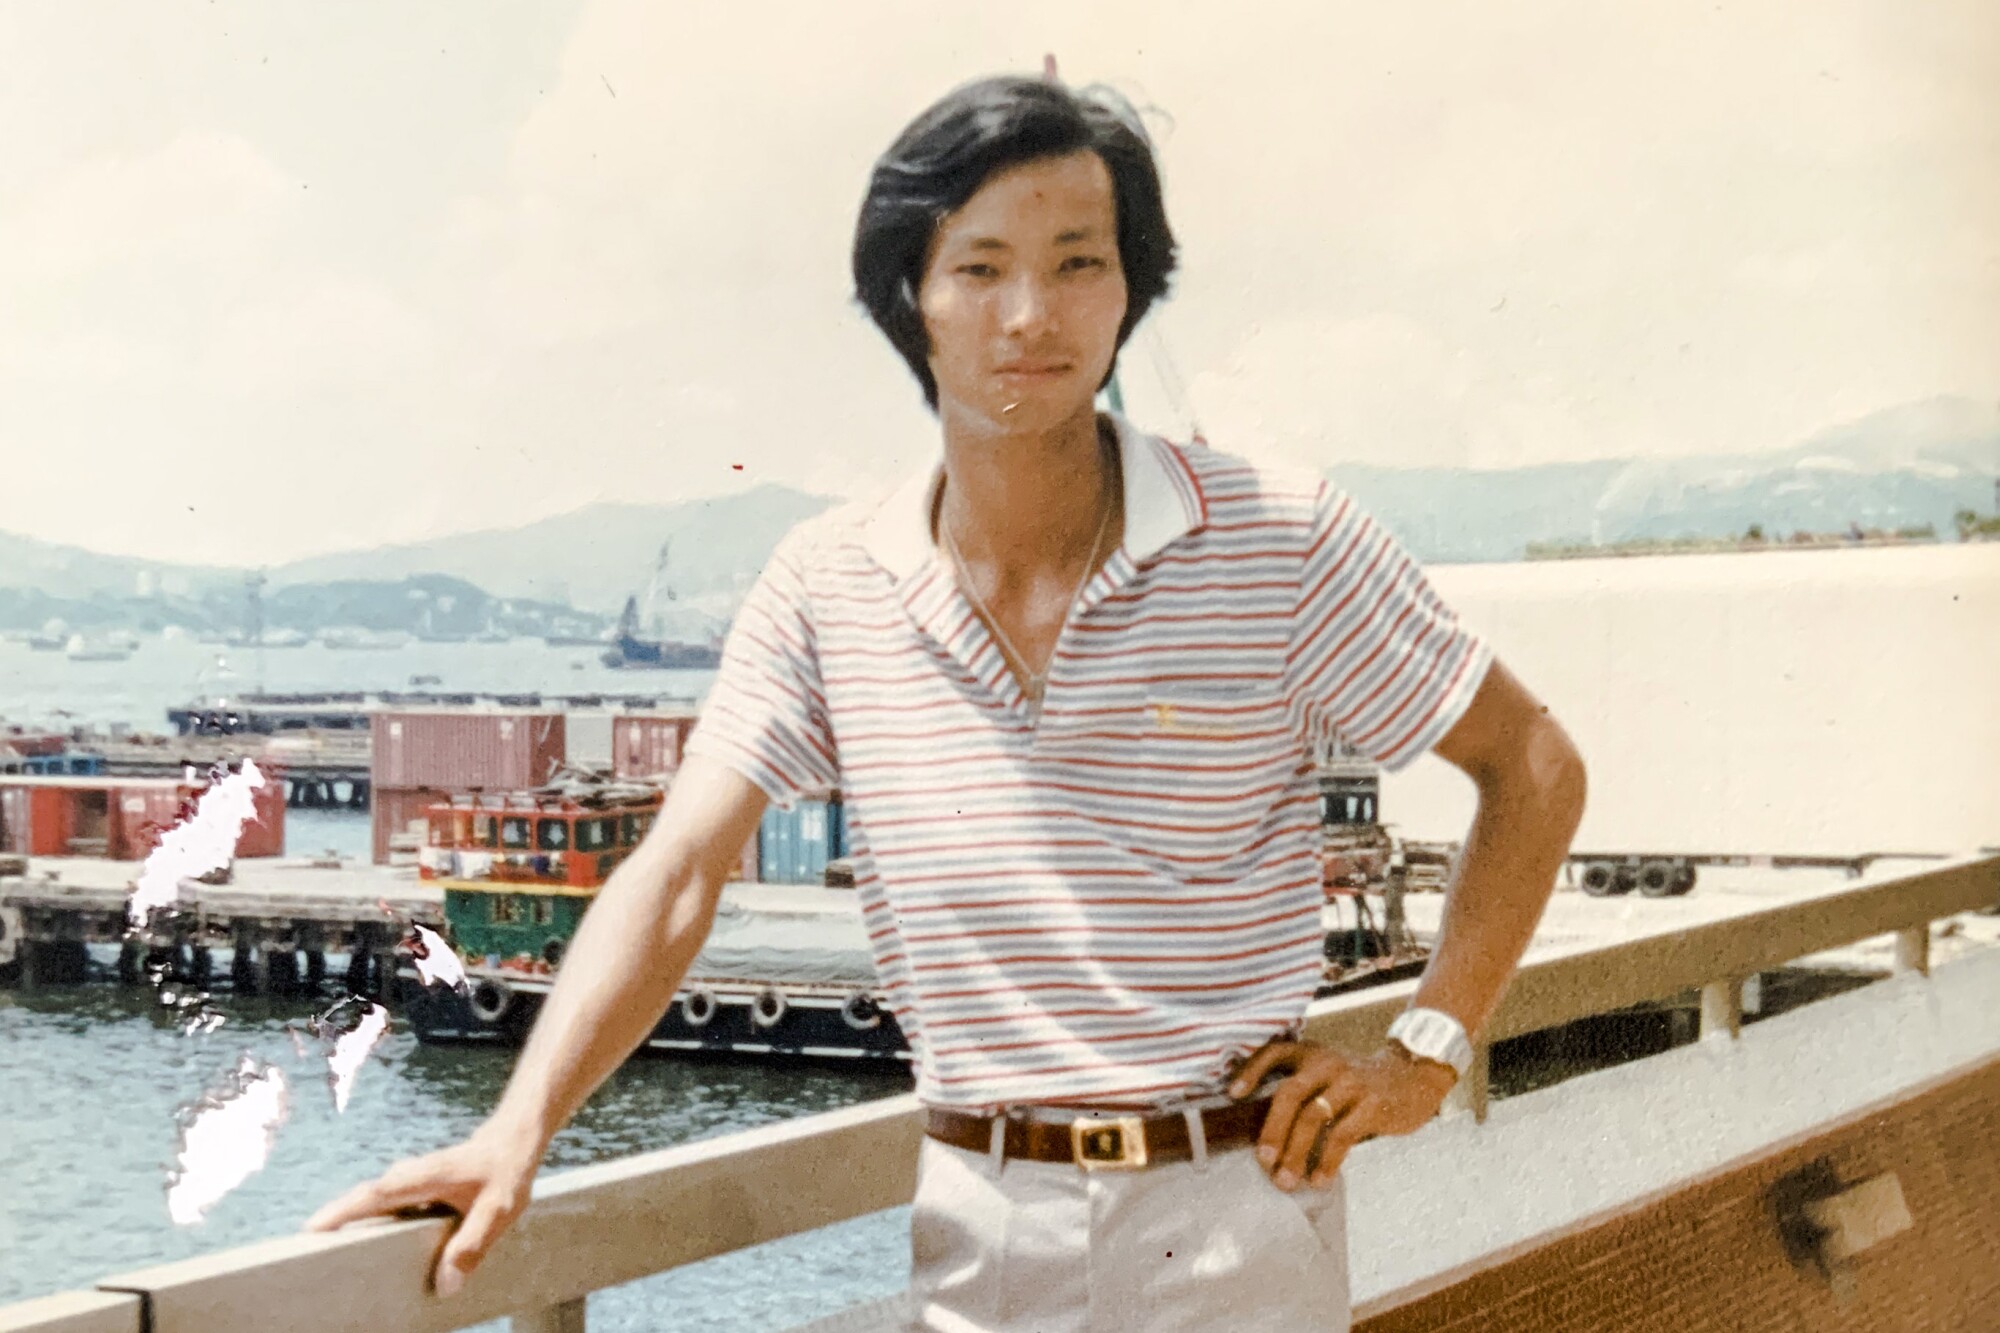 A man holds on to a wooden railing while looking forward with a hand on his hip in an early 1980s photo